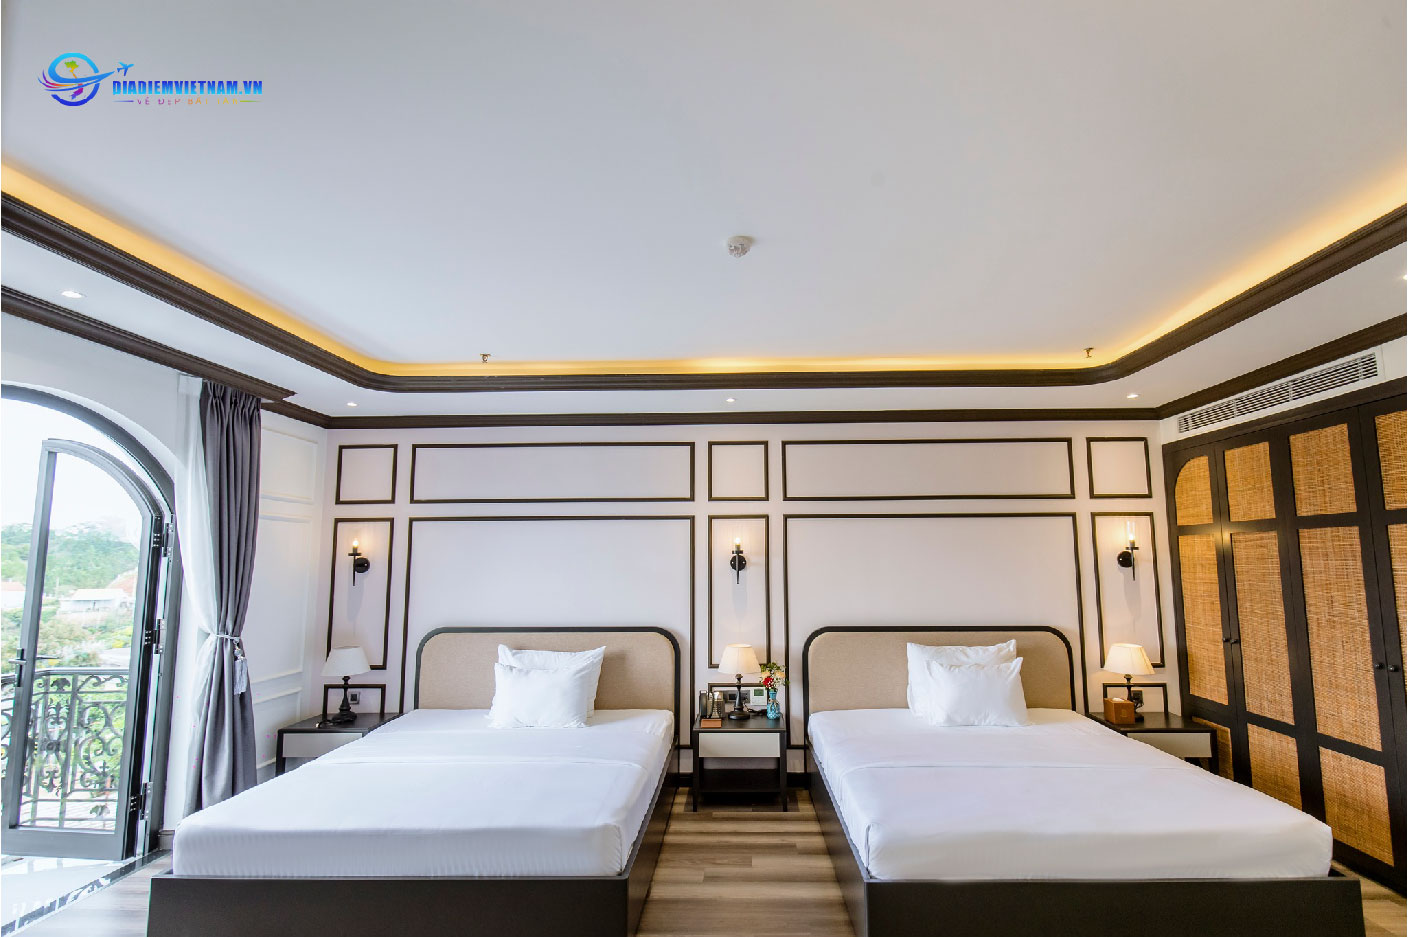 Phòng Deluxe Twin Room tại Robin Hotel Gia Nghĩa